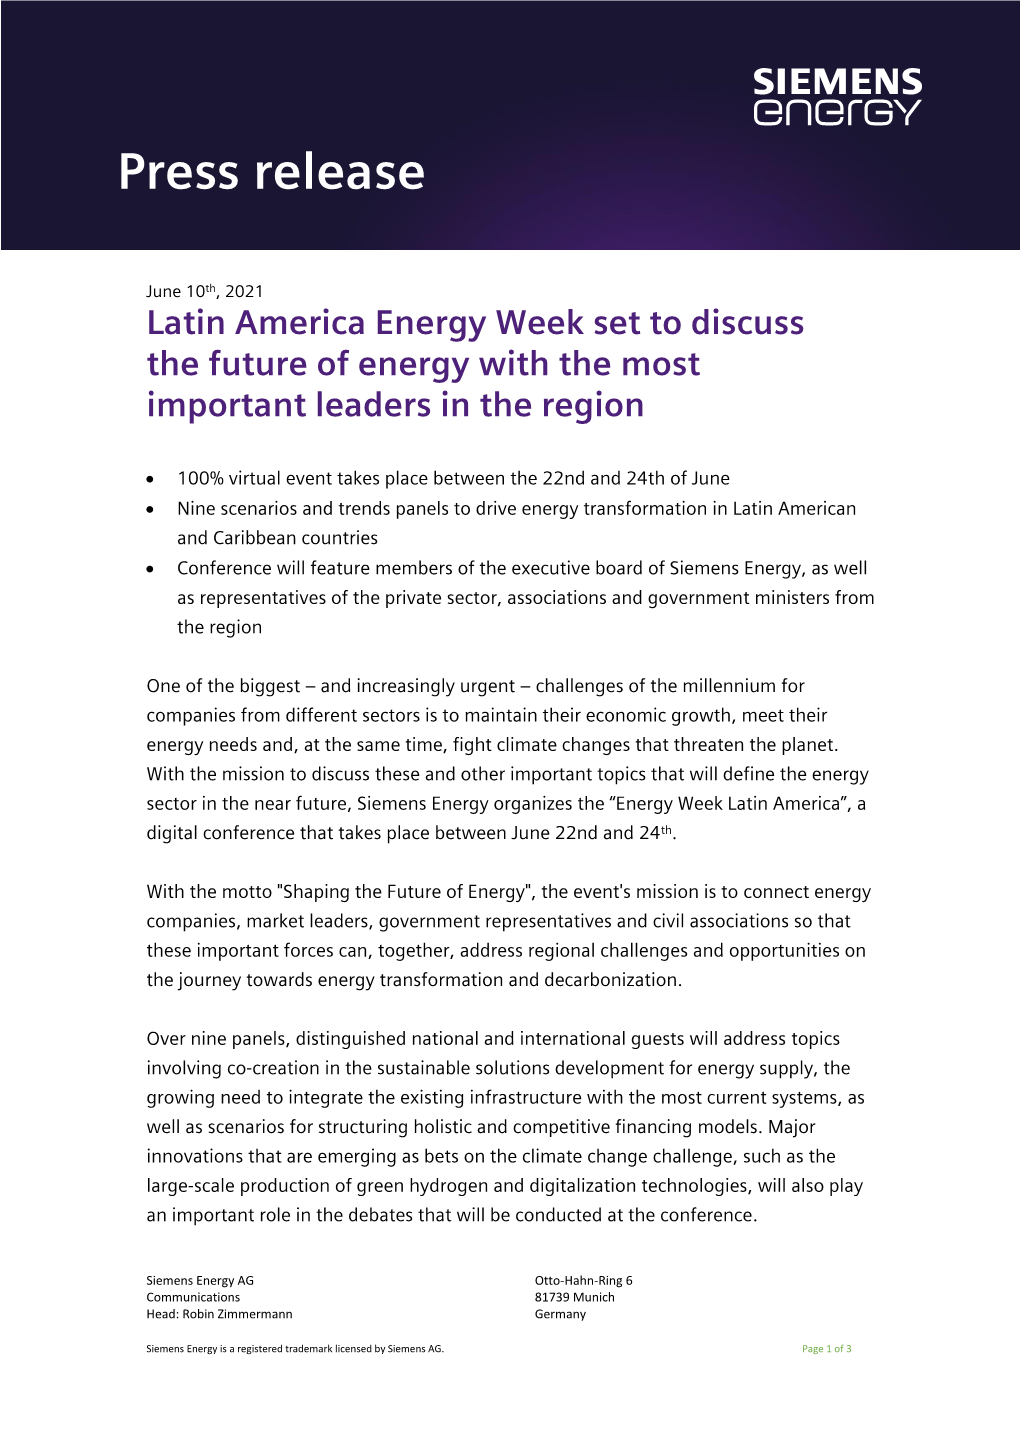 Latin America Energy Week Set to Discuss the Future of Energy with the Most Important Leaders in the Region